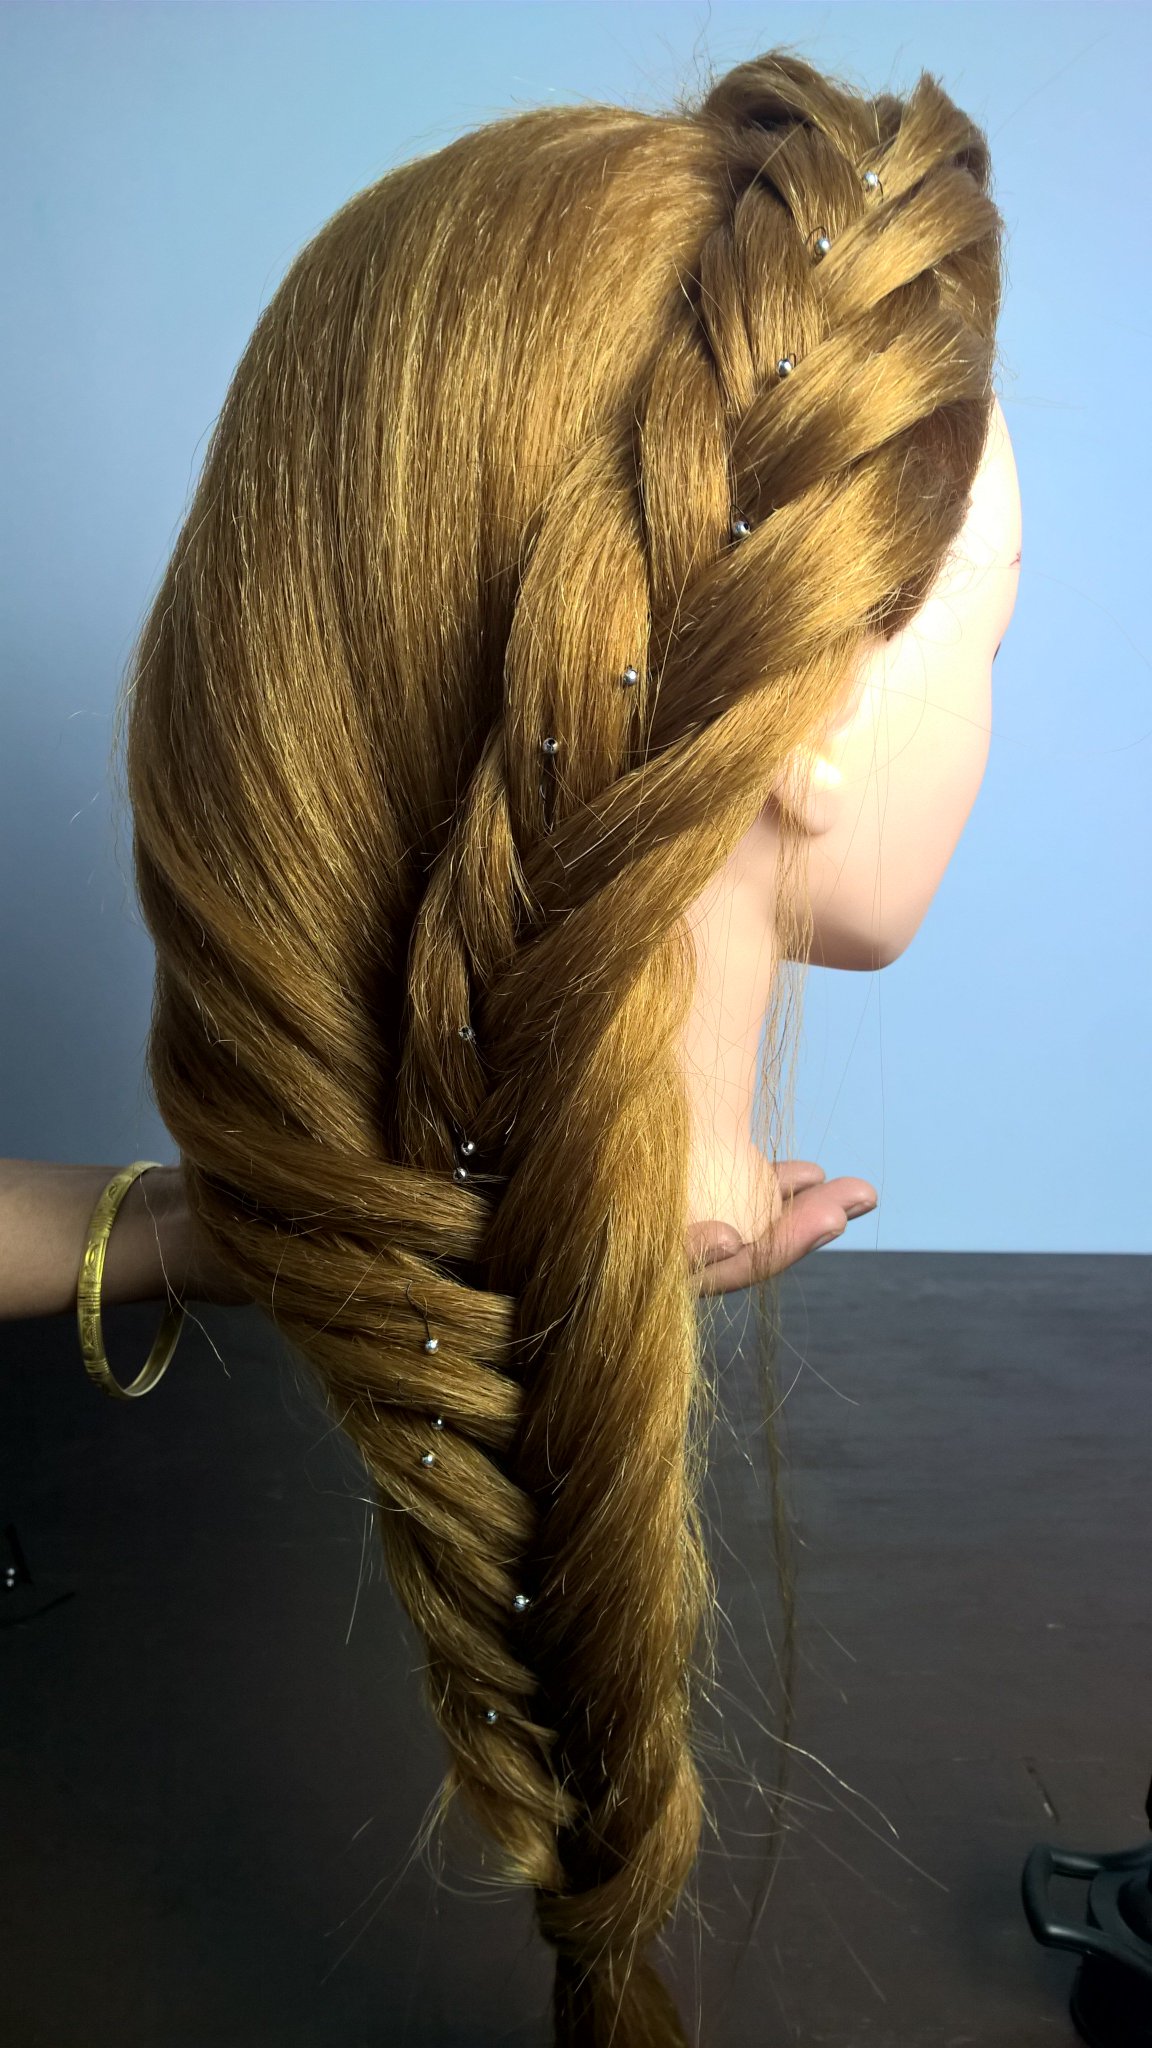 Charm Glow and Beauty auf Twitter: „A simple yet stylish barbie doll  hairstyle, learn step-by-step french choti (braid) hairstyles. #Braid # Hairstyles Watch All Video /93Y3JHRIK6  /Bie1RGRbUd“ / Twitter